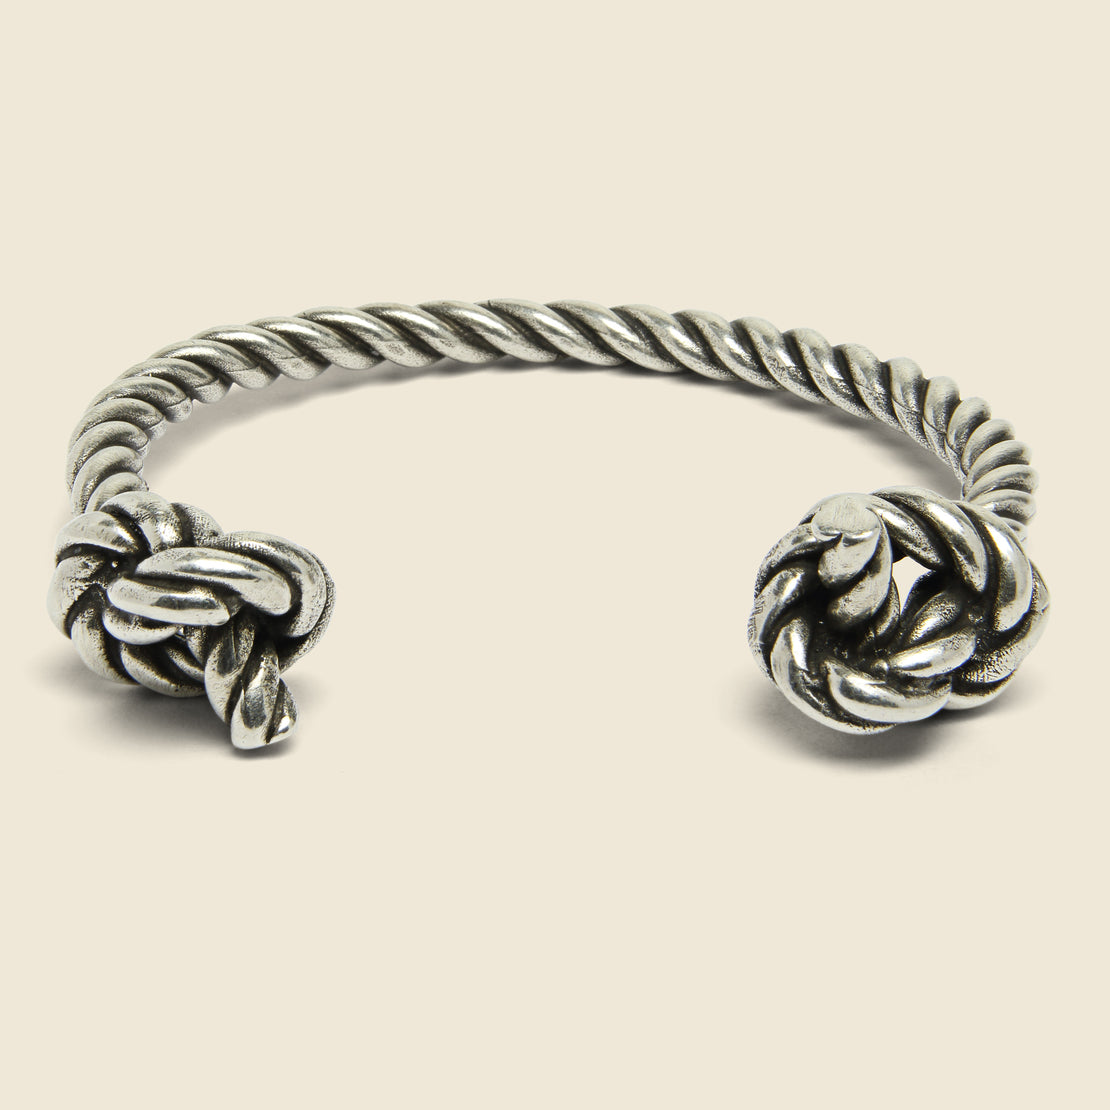 Twisted Knot Open Cuff - Silver Oxide - Giles & Brother - STAG Provisions - Accessories - Cuffs